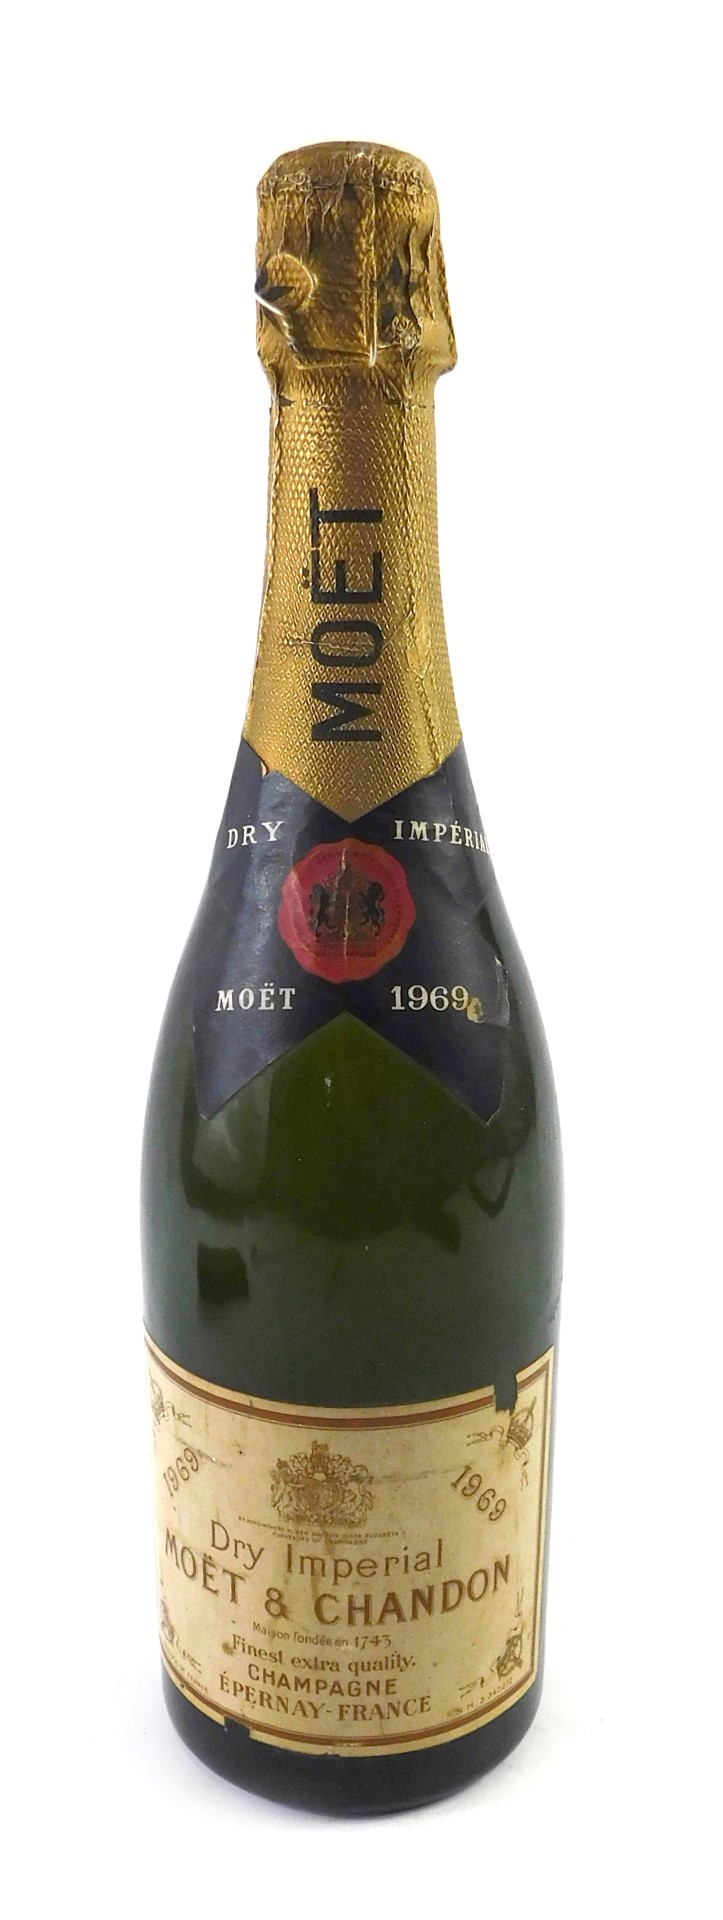 A bottle of Moet & Chandon 1969 Dry Imperial champagne.